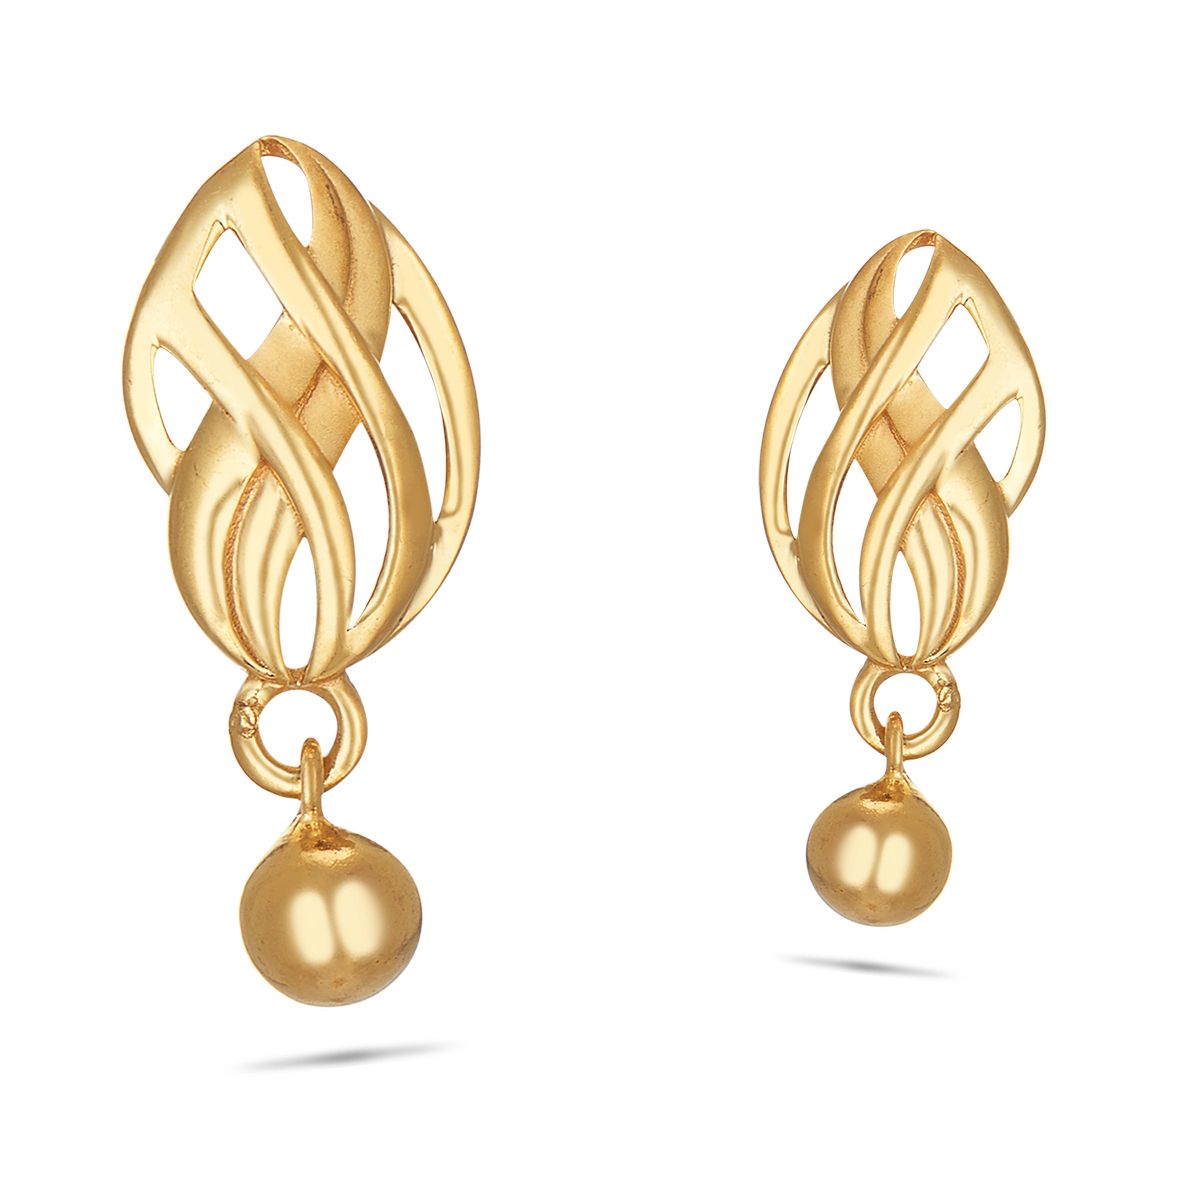 Tear Drop Gold Earrings Designs For Daily Use